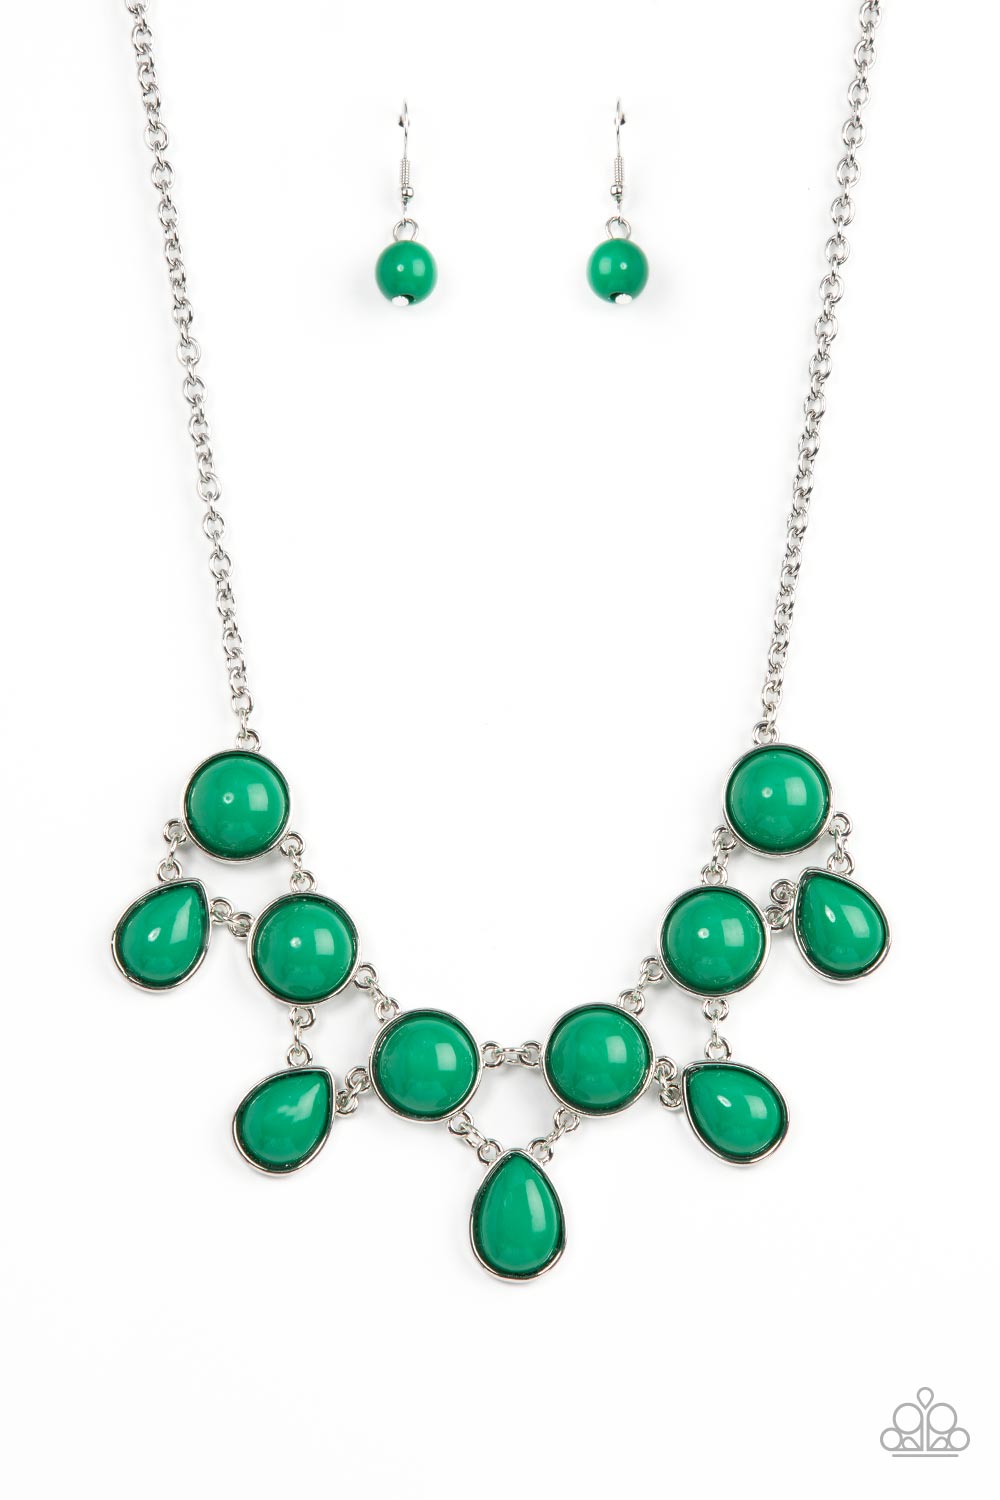 Paparazzi Necklaces - Very Valley Girl - Green